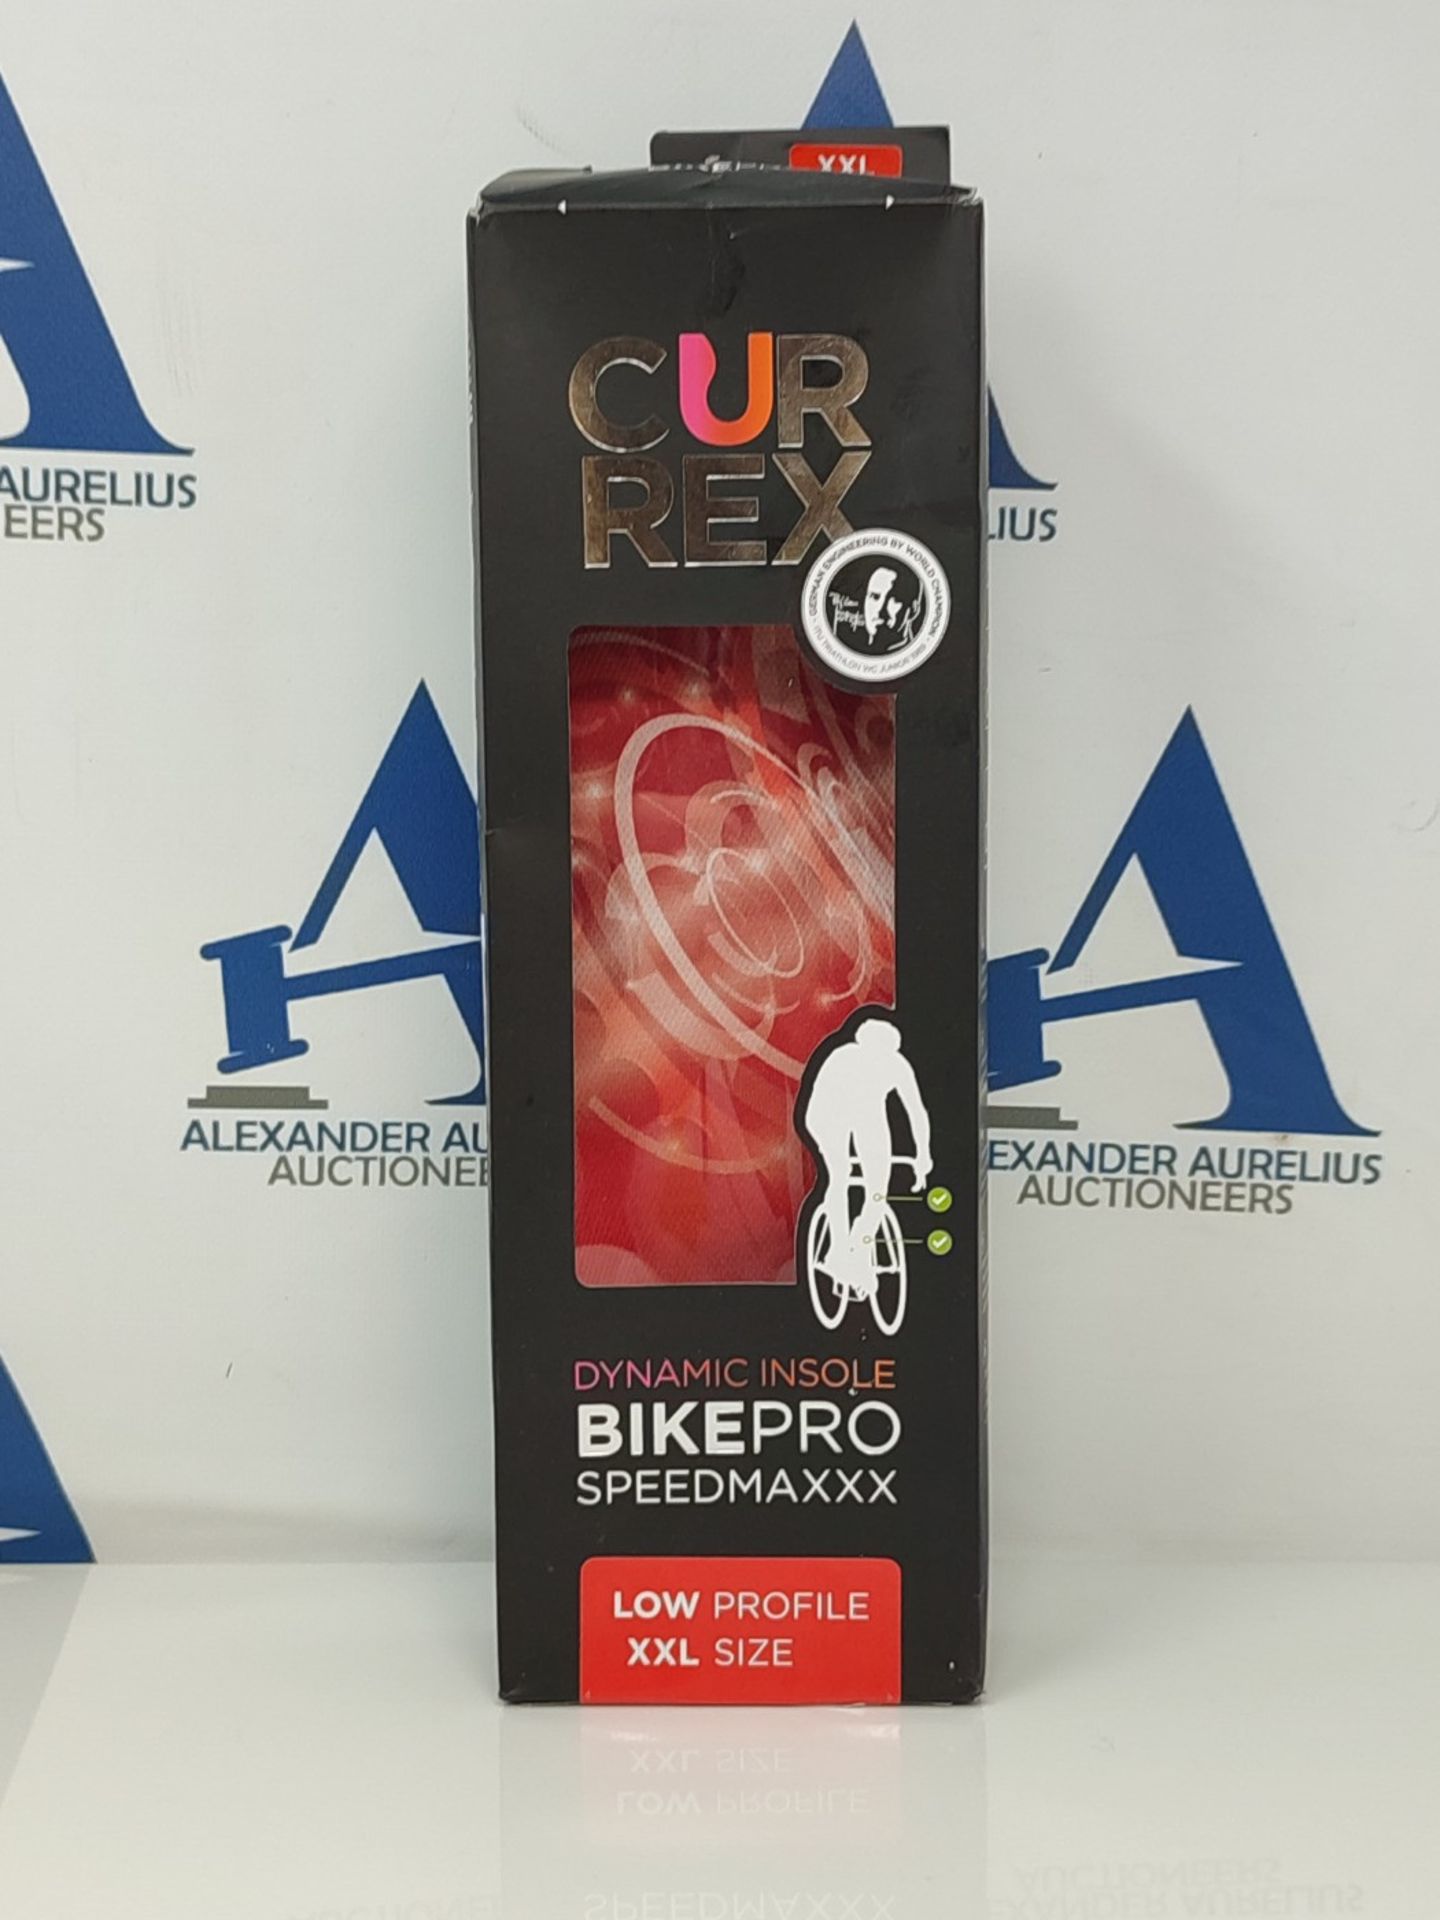 RRP £69.00 CURREX BikePro Sole - Your New Dimension in Biking. Dynamic Performance Insole for Cyc